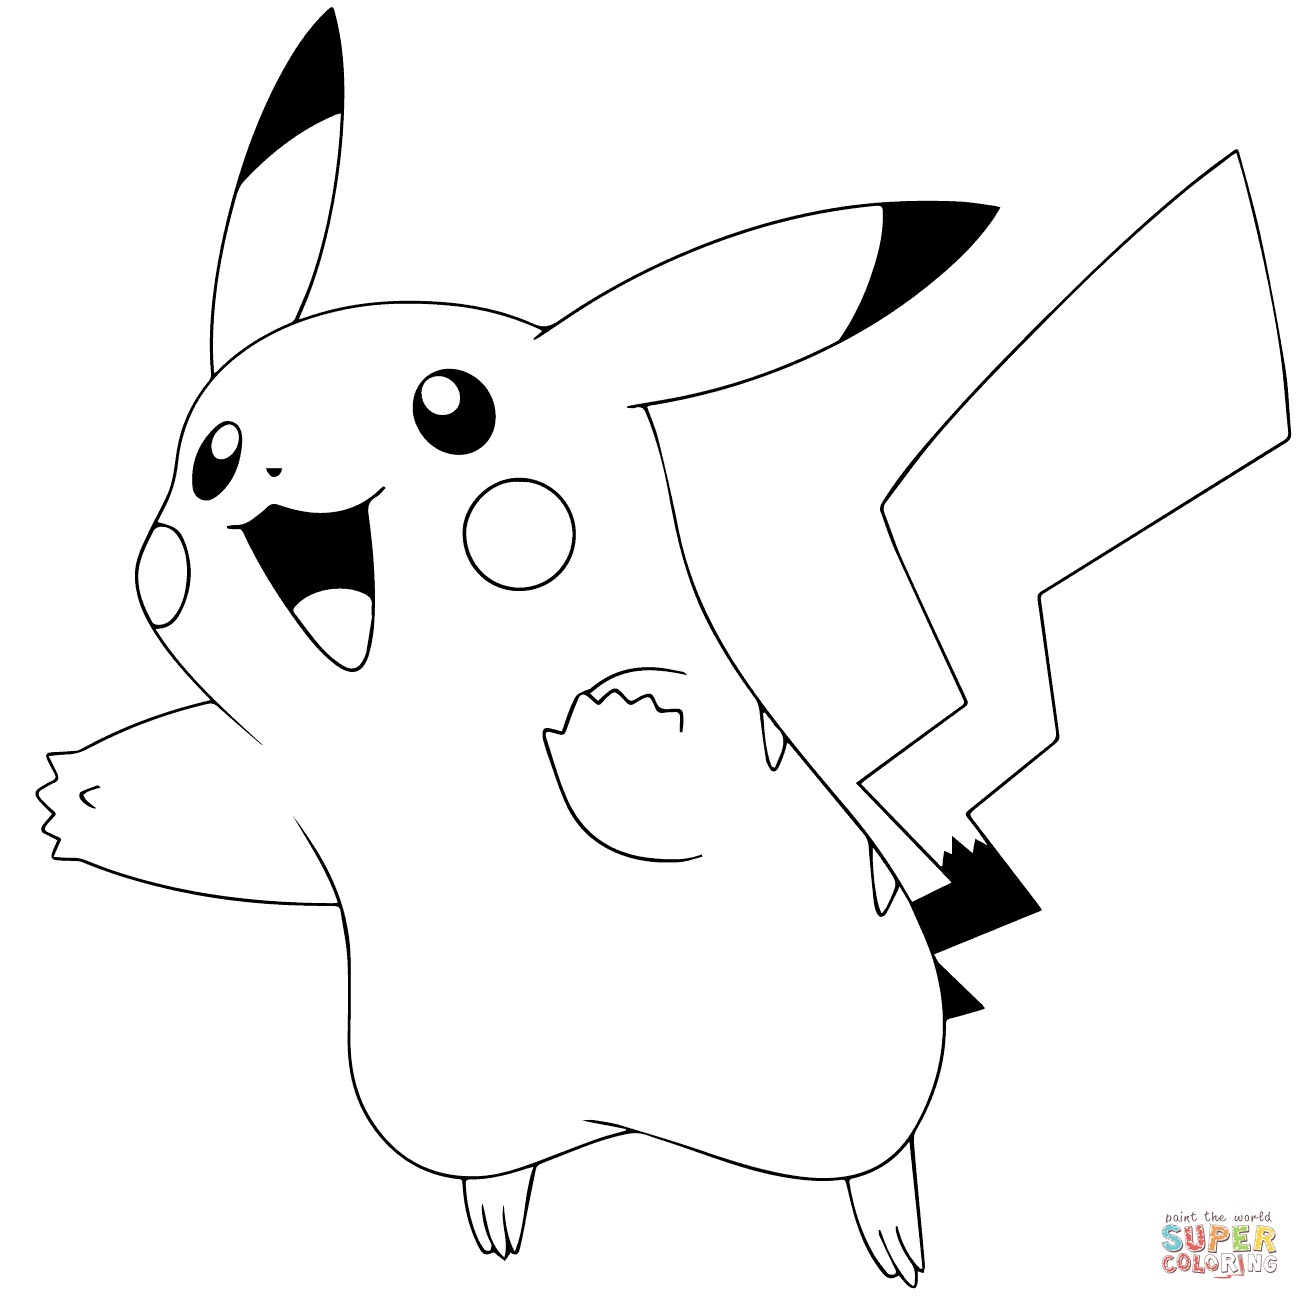 Pikachu Libre Coloring Page Coloring Pages Pikachu Wiim Coloring Page